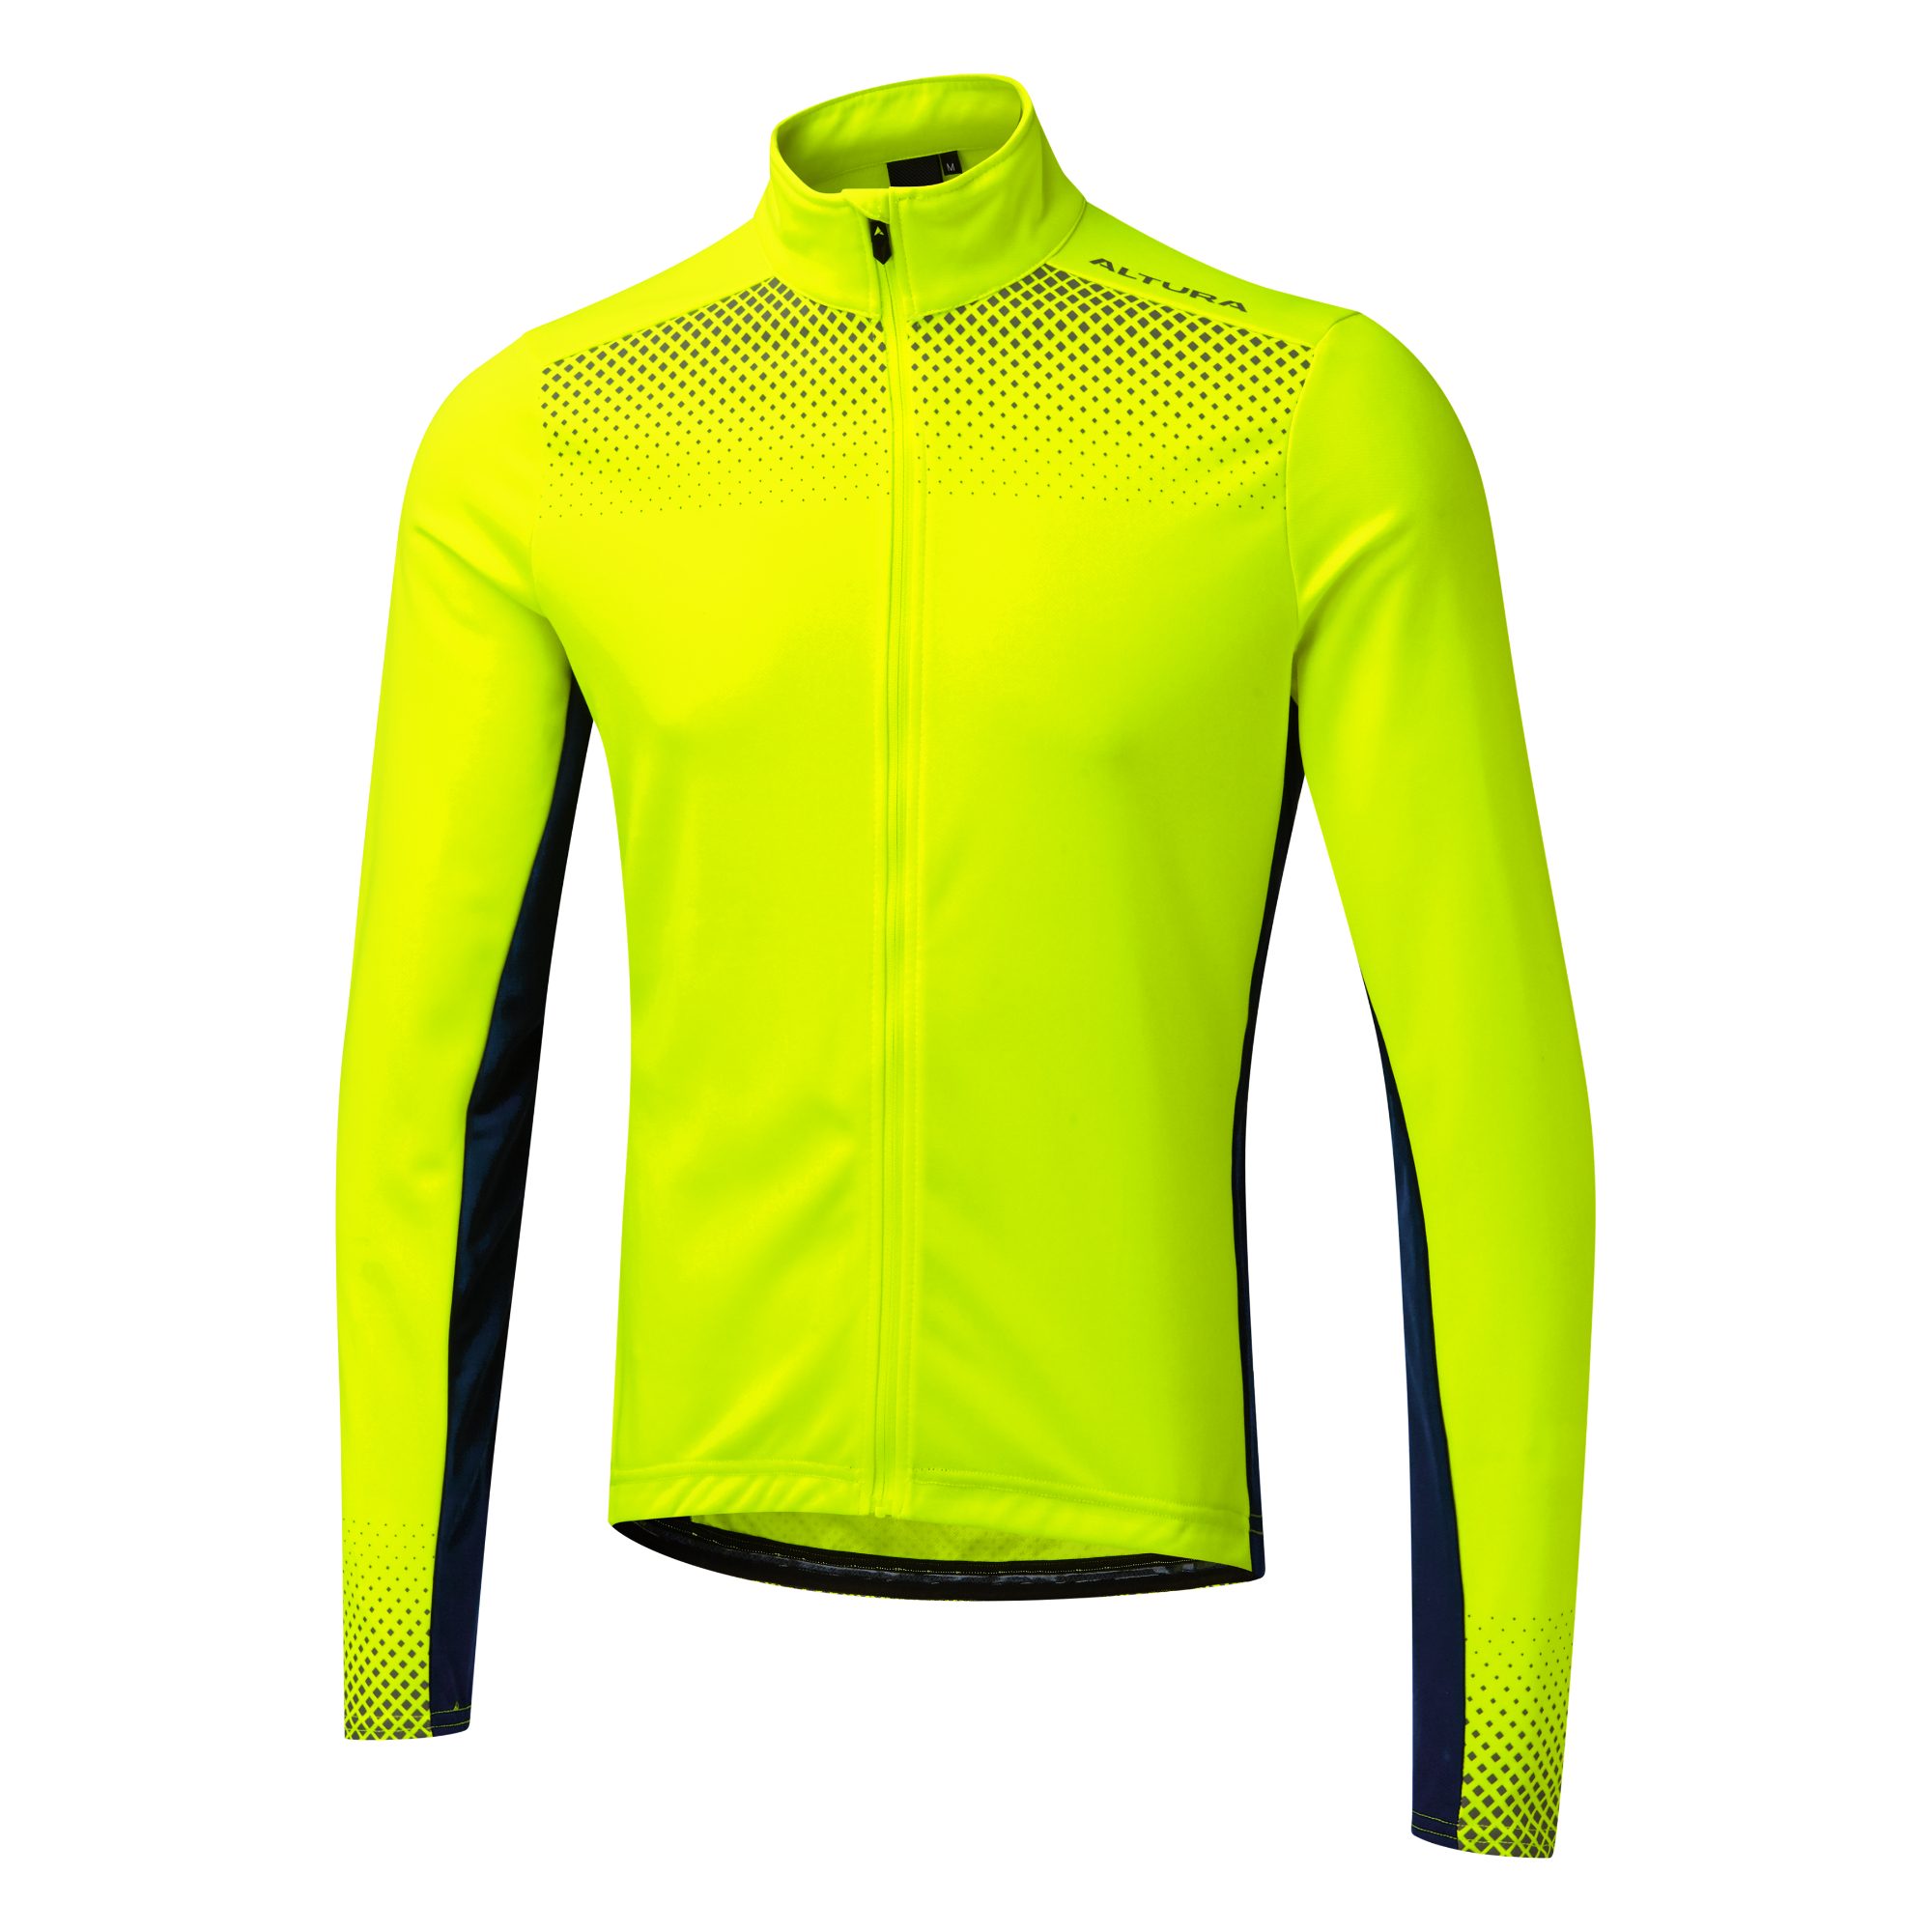 Download Altura Nightvision LS Reflective Cycle Bike Jersey Shirt ...